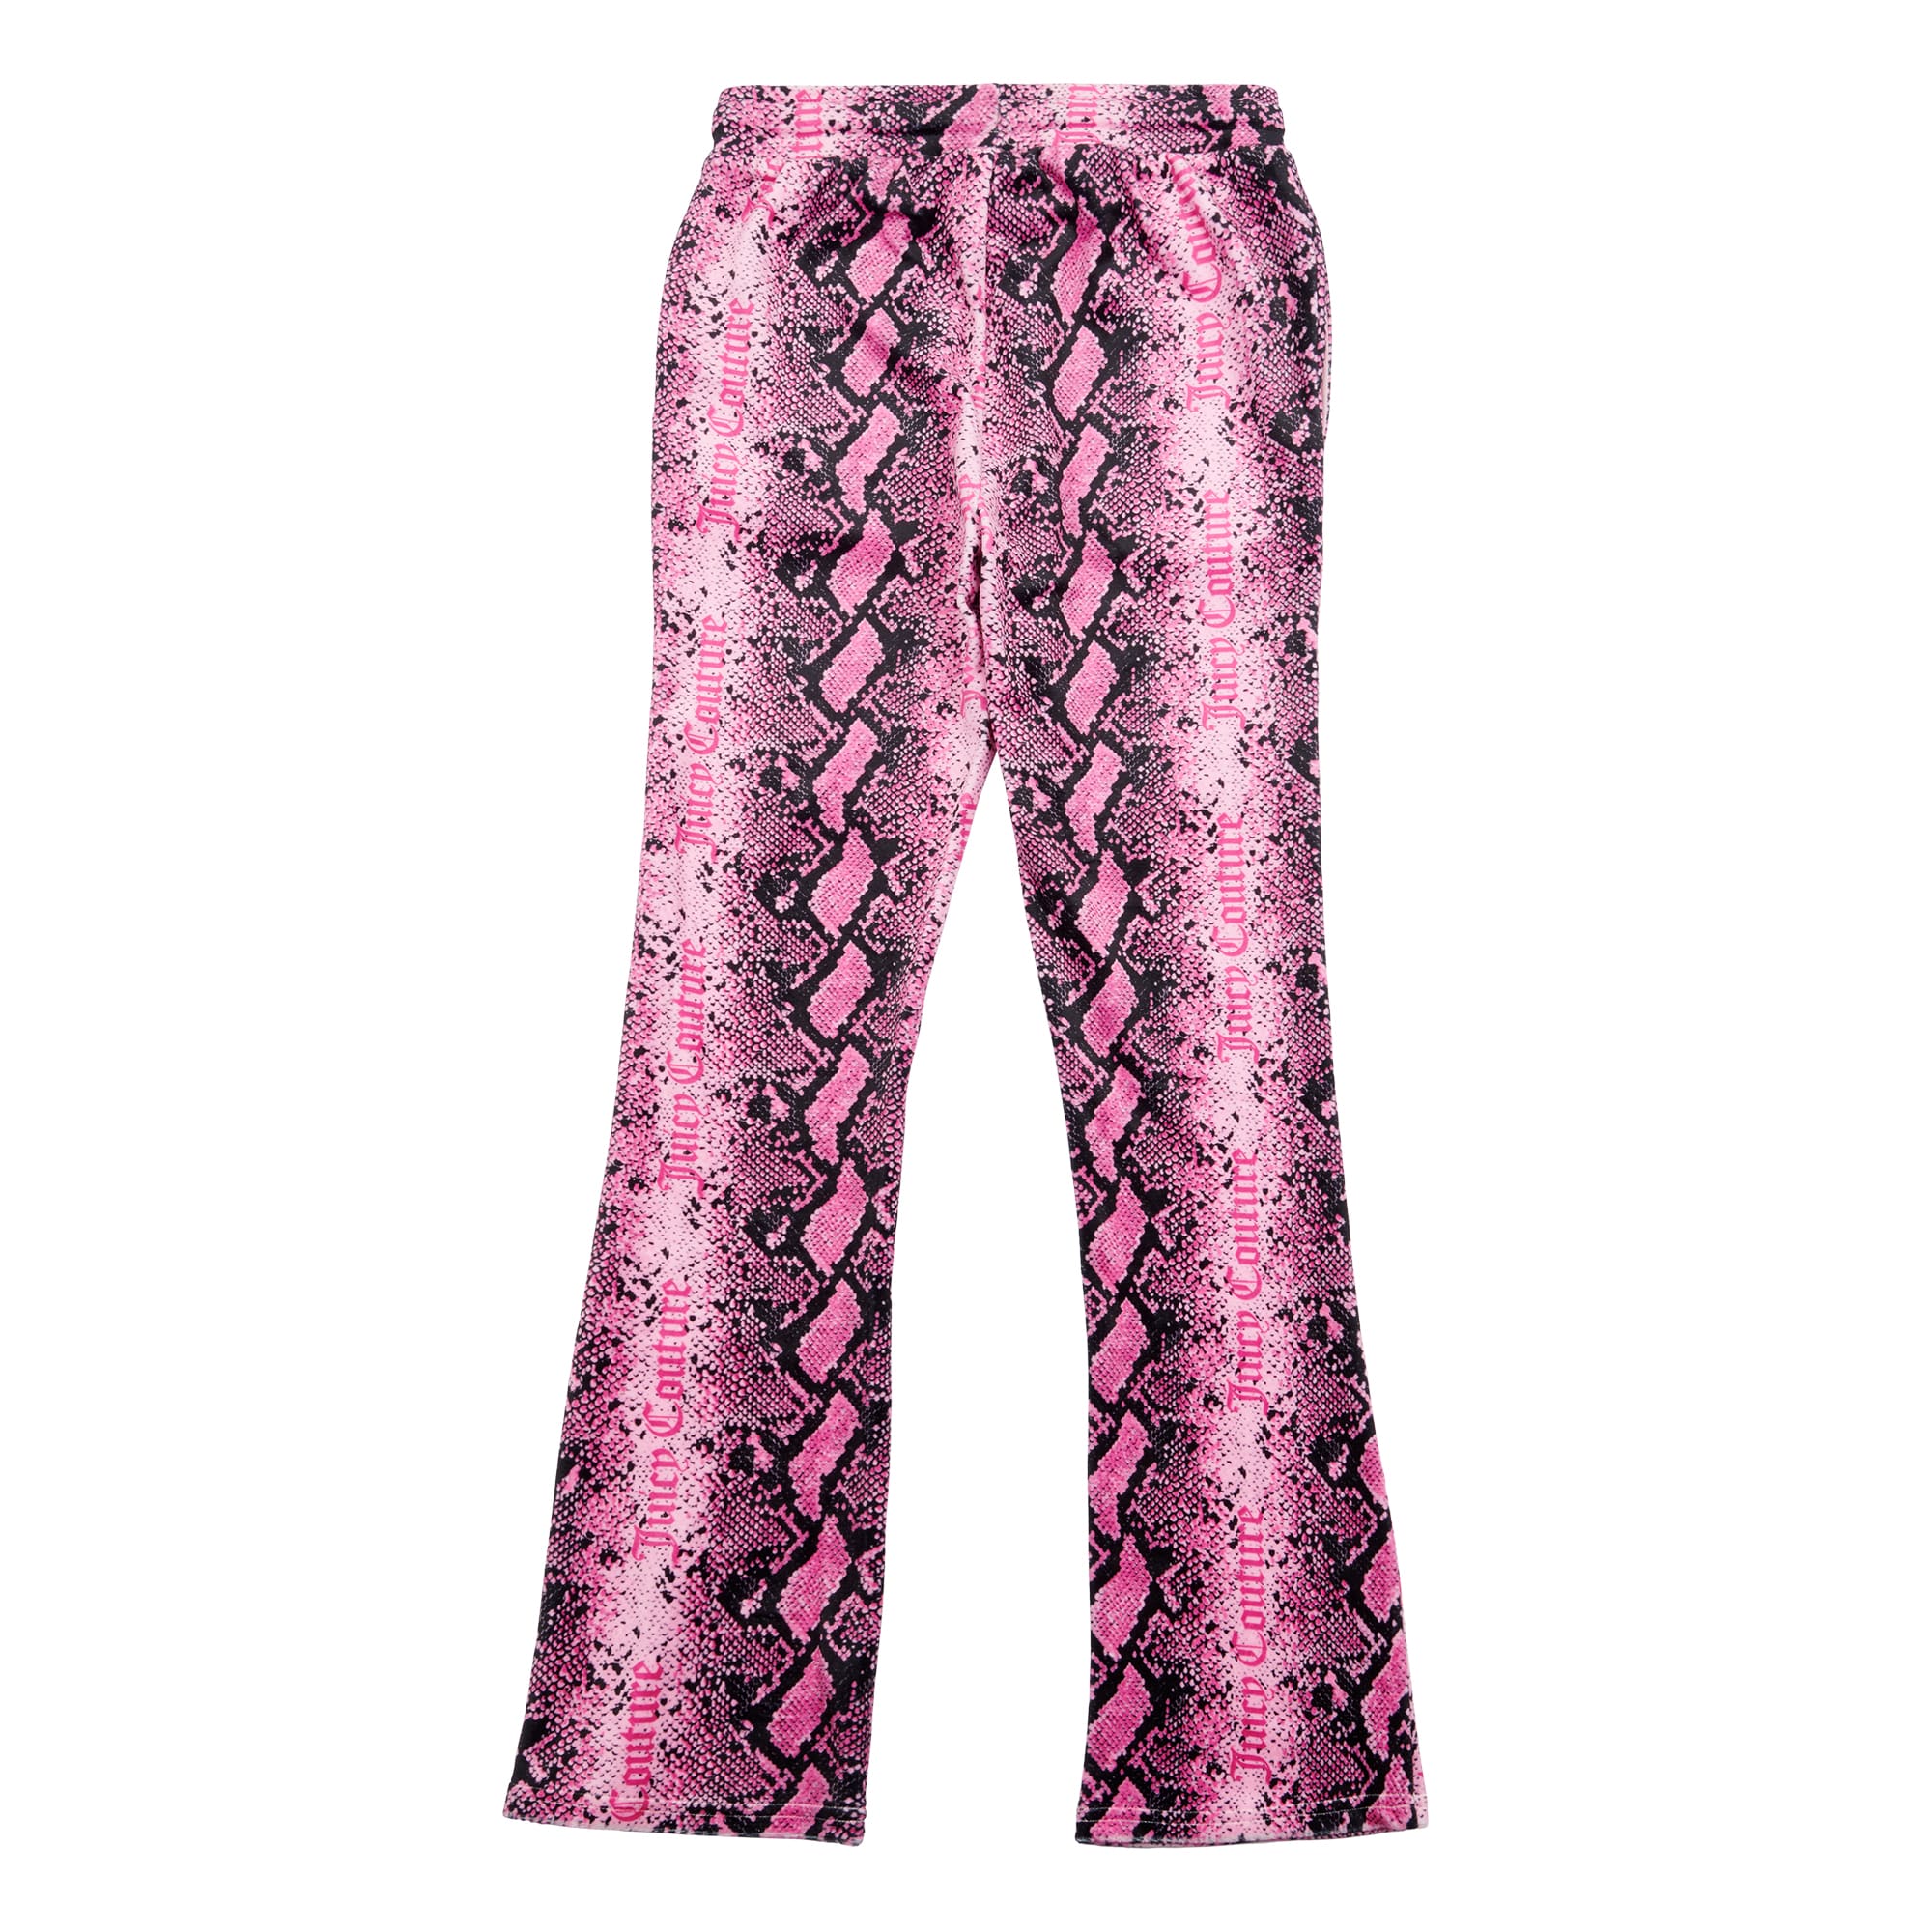 Juicy Couture pink snakeskin girls tracksuit bottoms